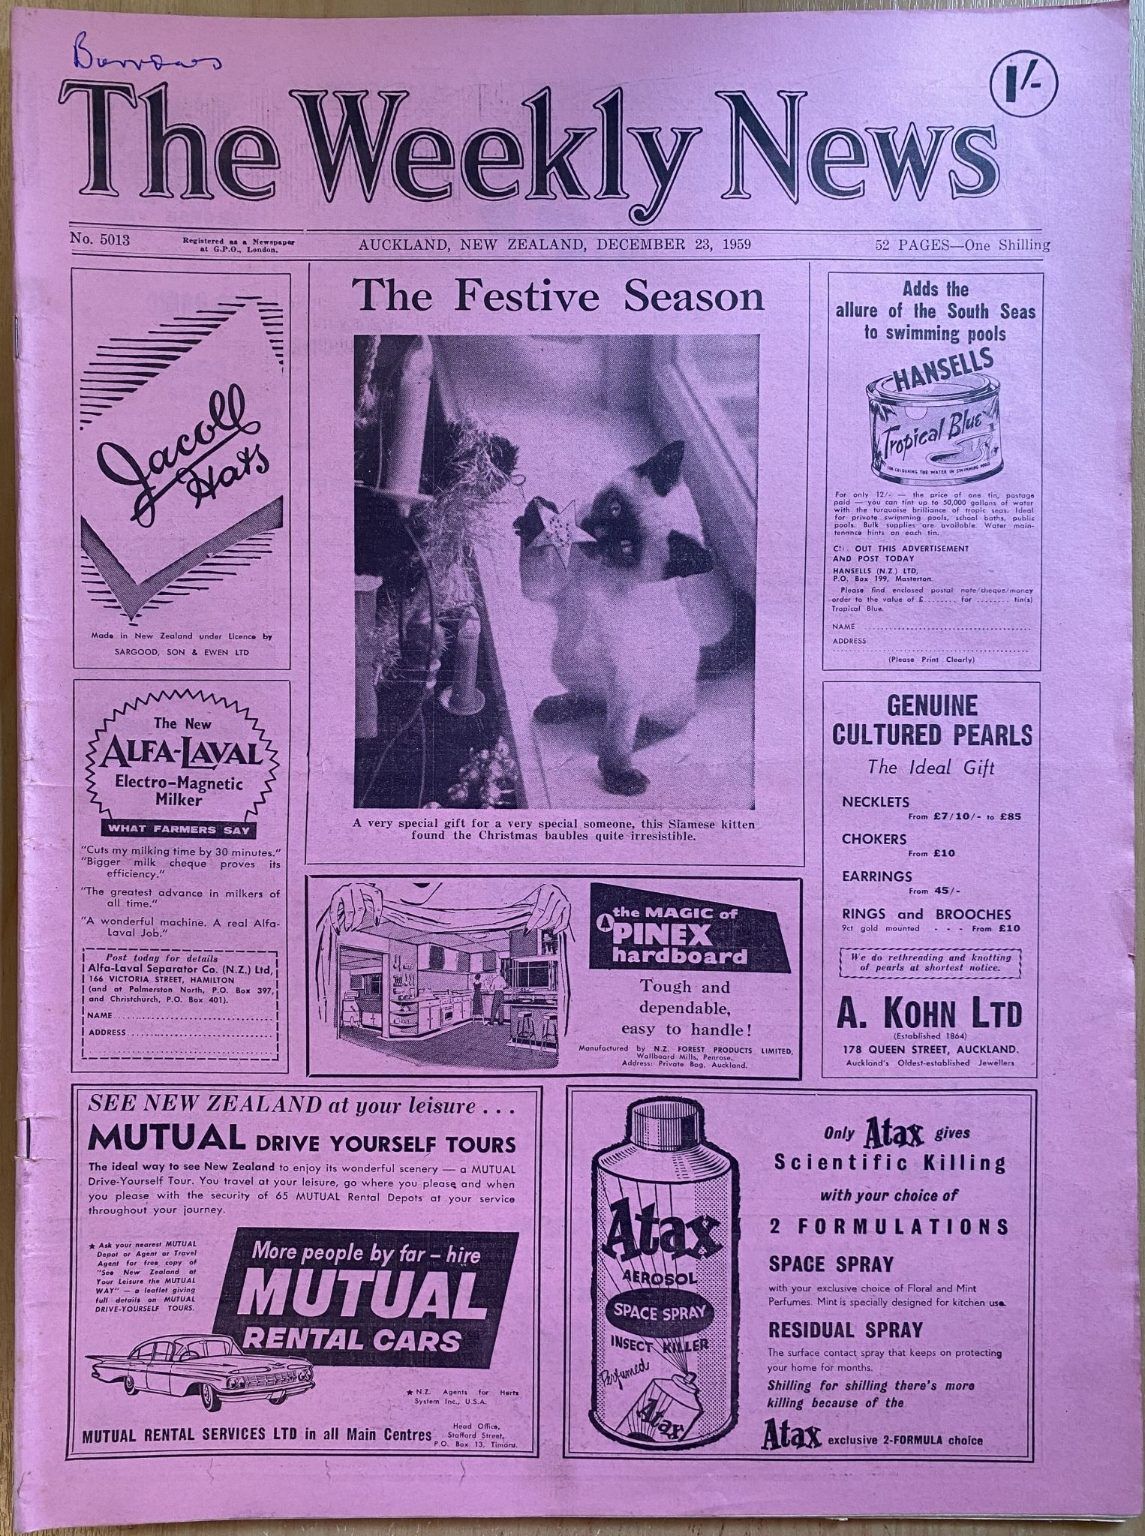 OLD NEWSPAPER: The Weekly News - No. 5013, 23 December 1959